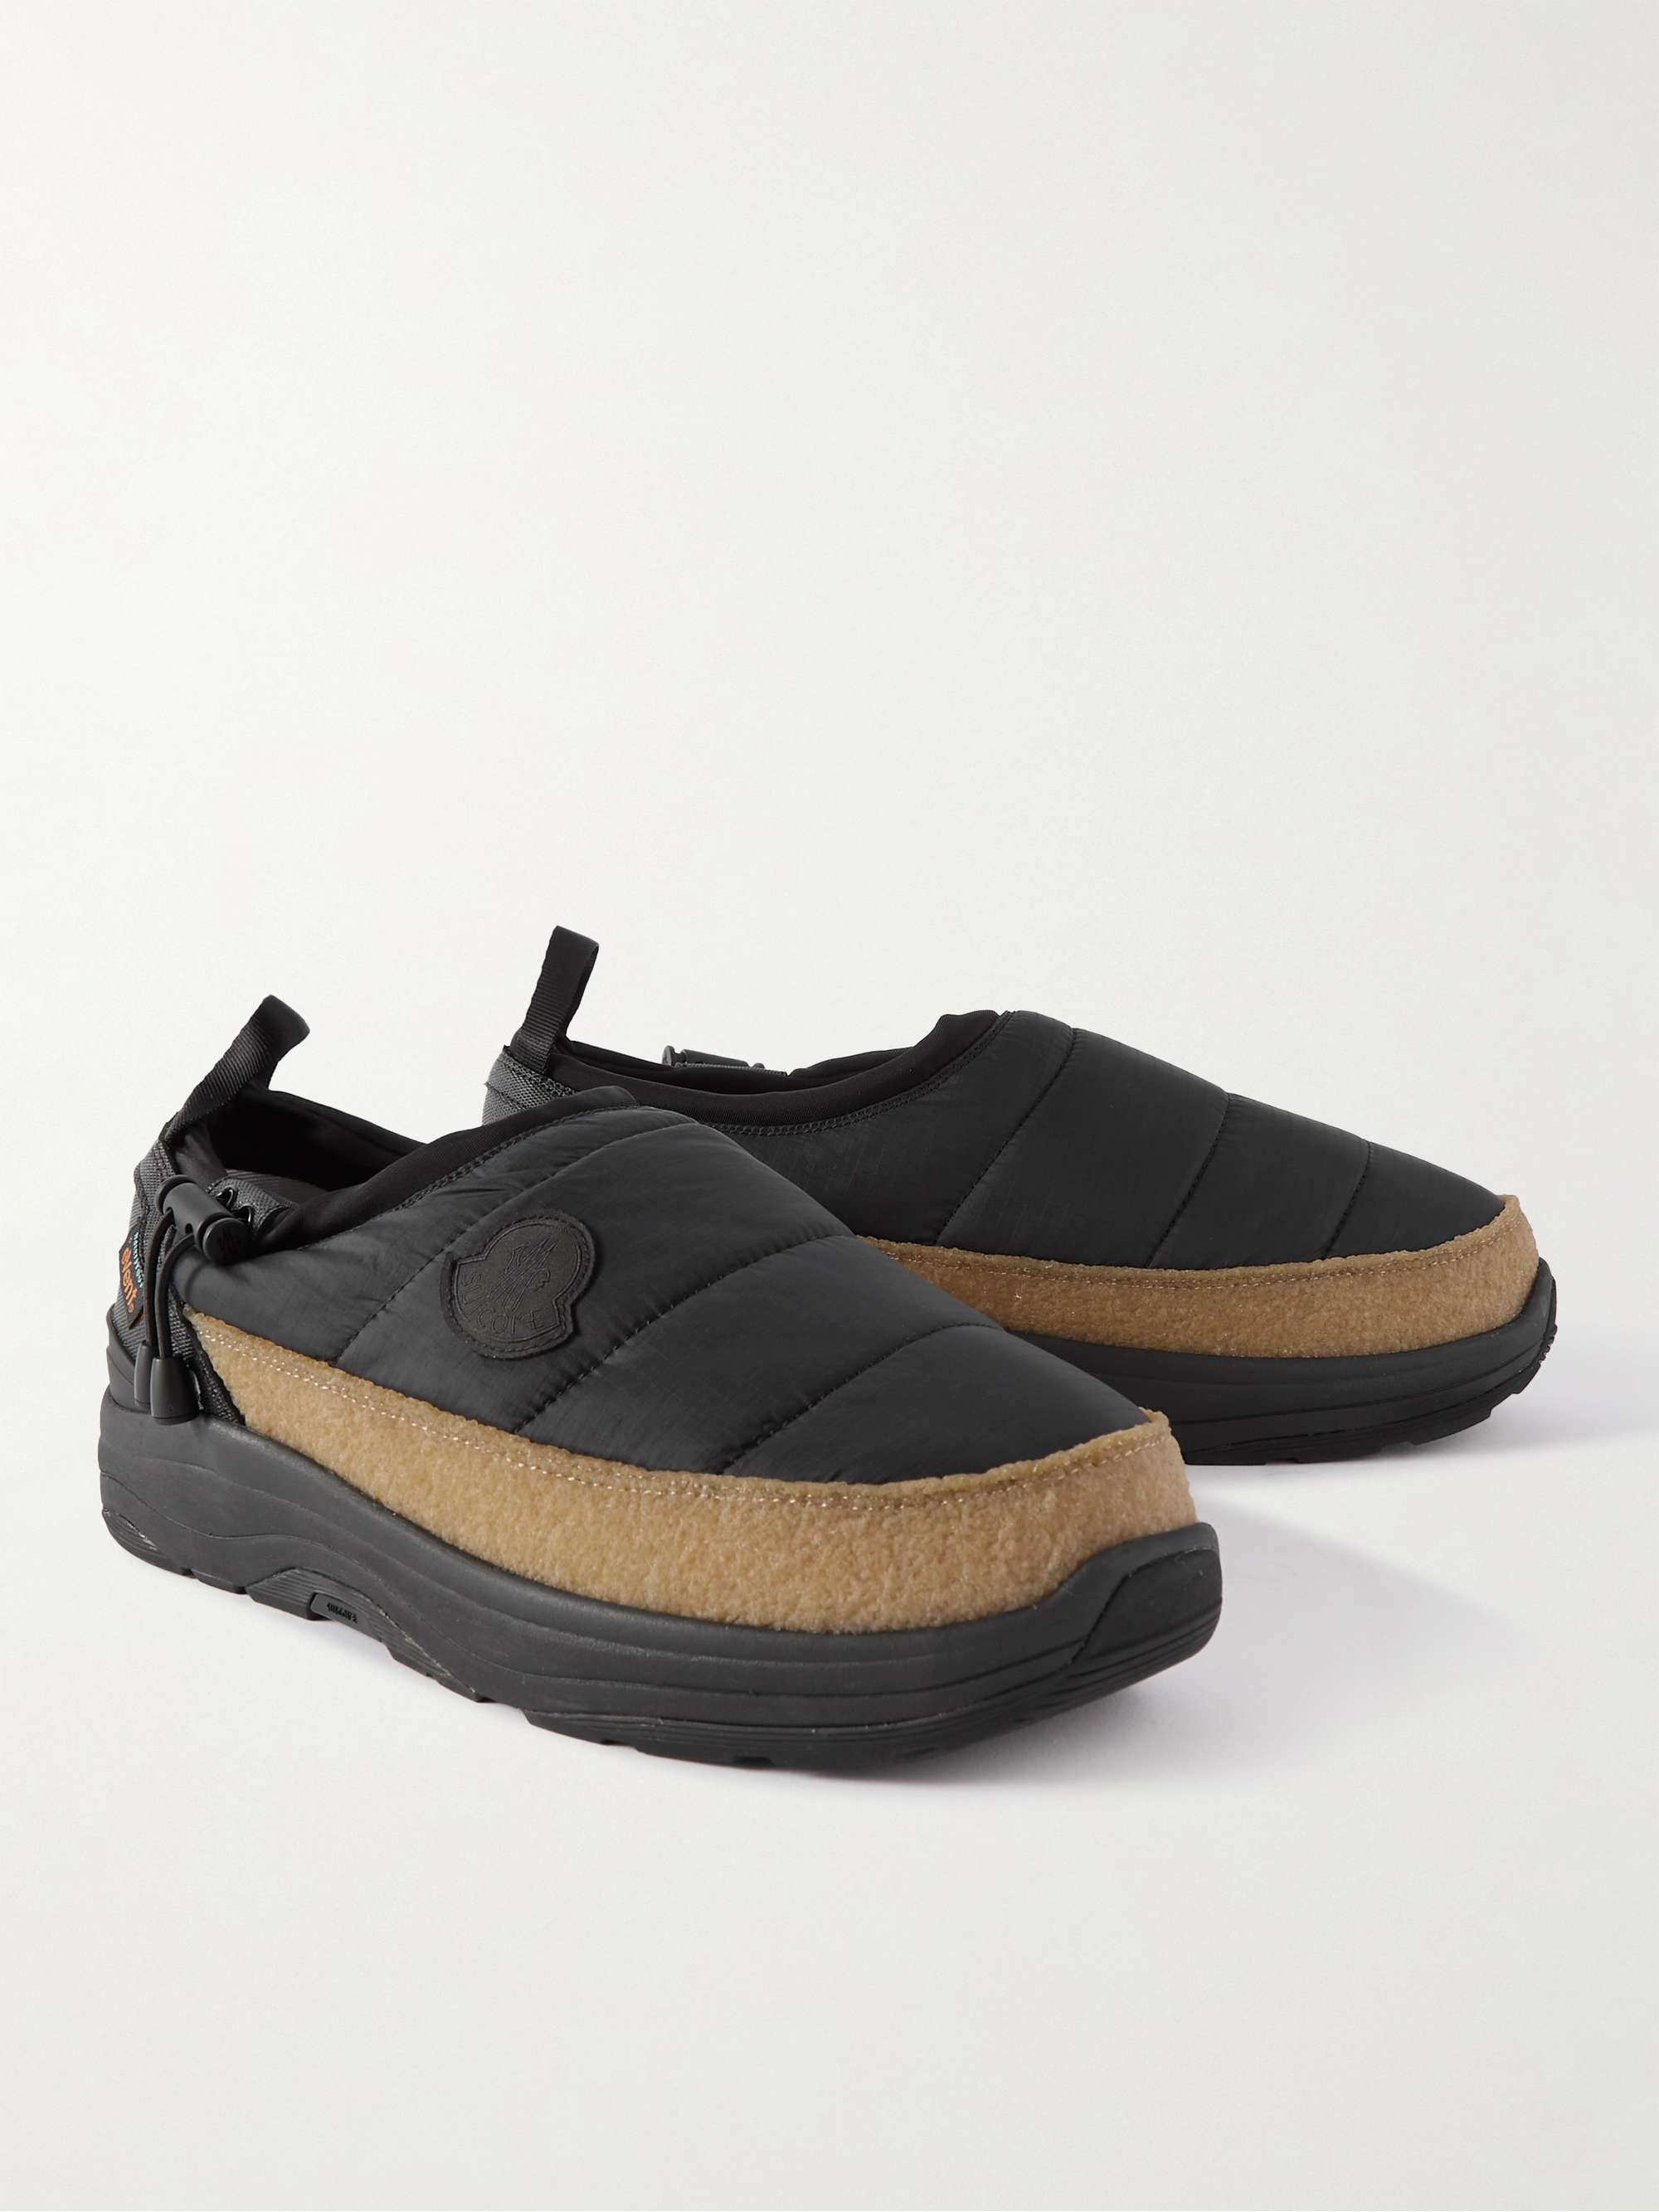 Black + Suicoke 2 Moncler 1952 Pepper Quilted Nylon Loafers | MONCLER ...